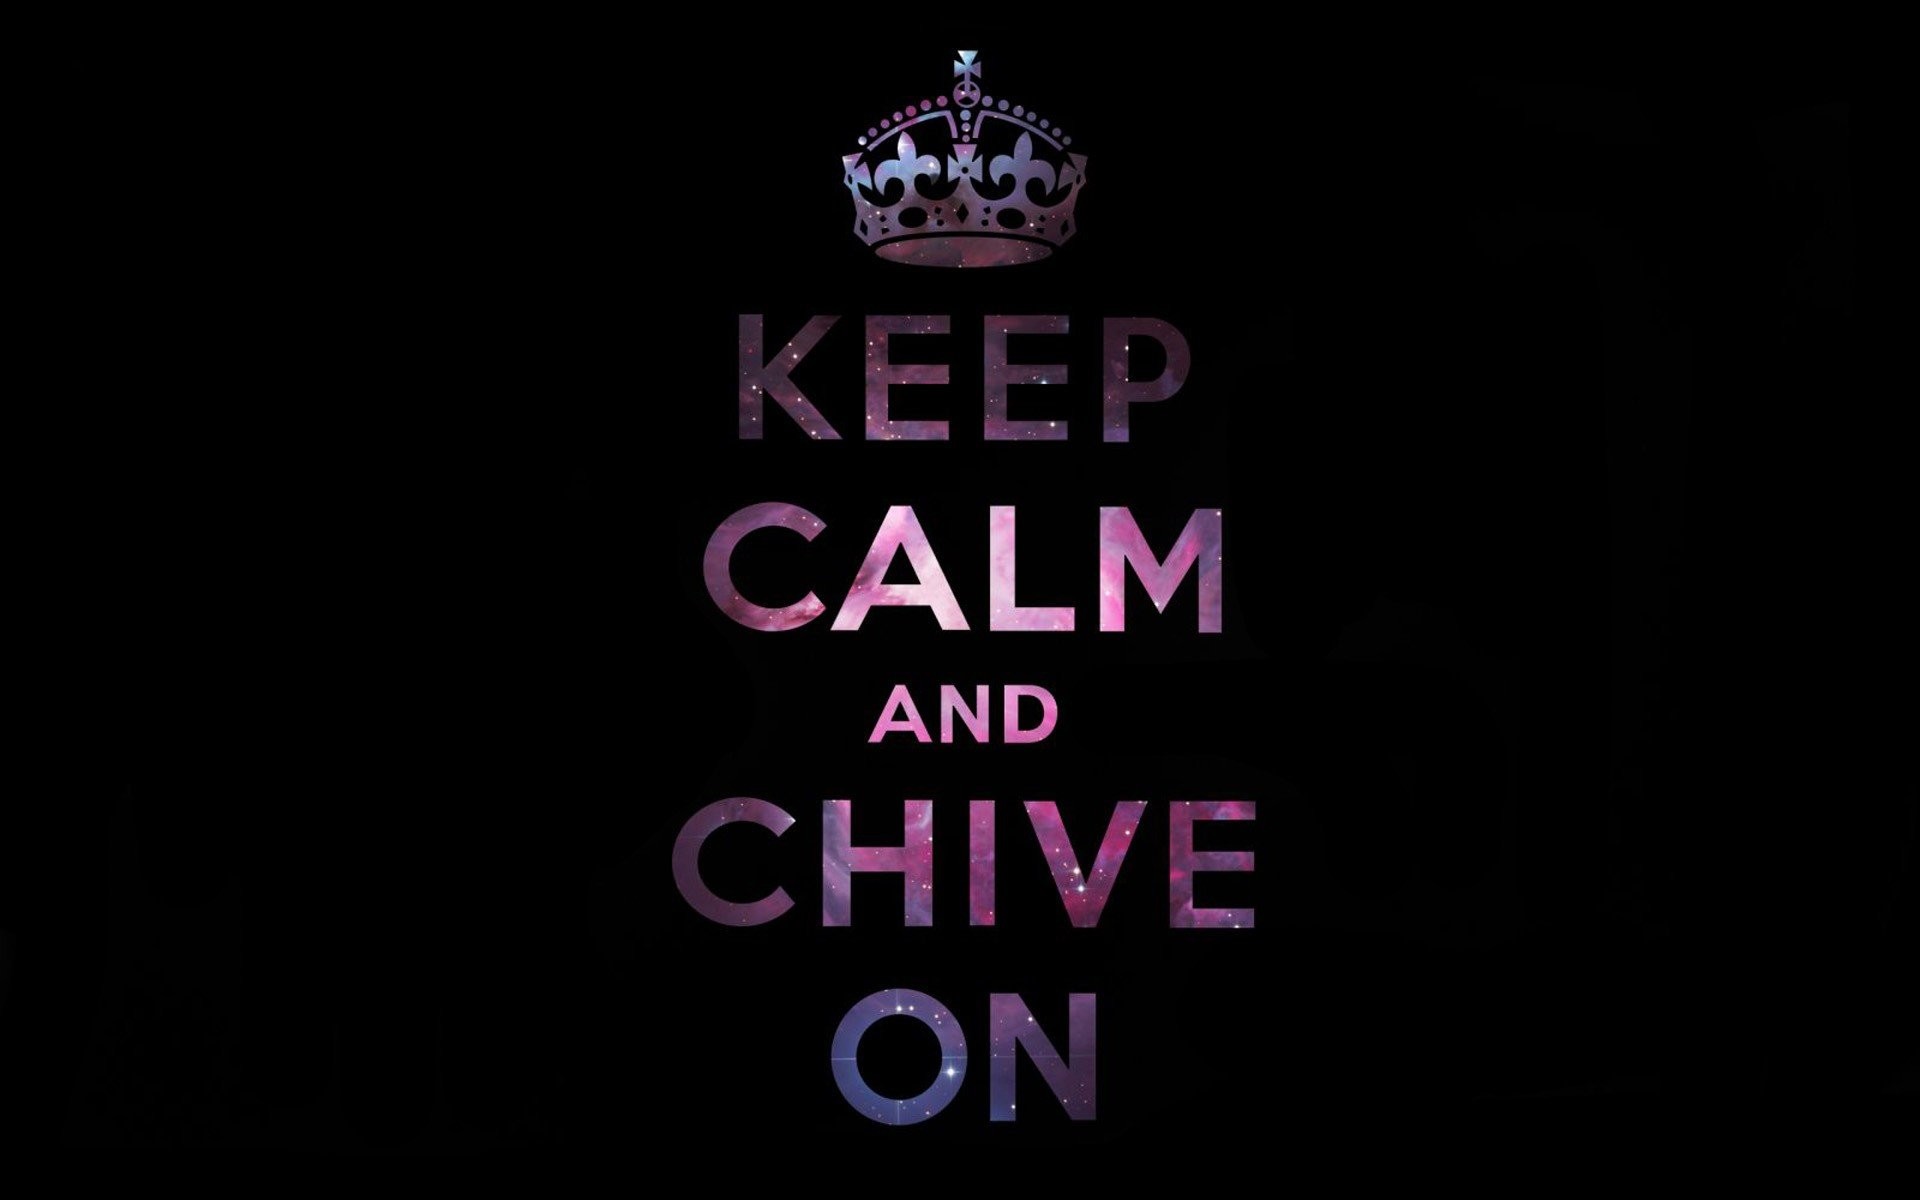 1920x1200 Calm and black background KCCO The Chive ChiveOn wallpaper background .